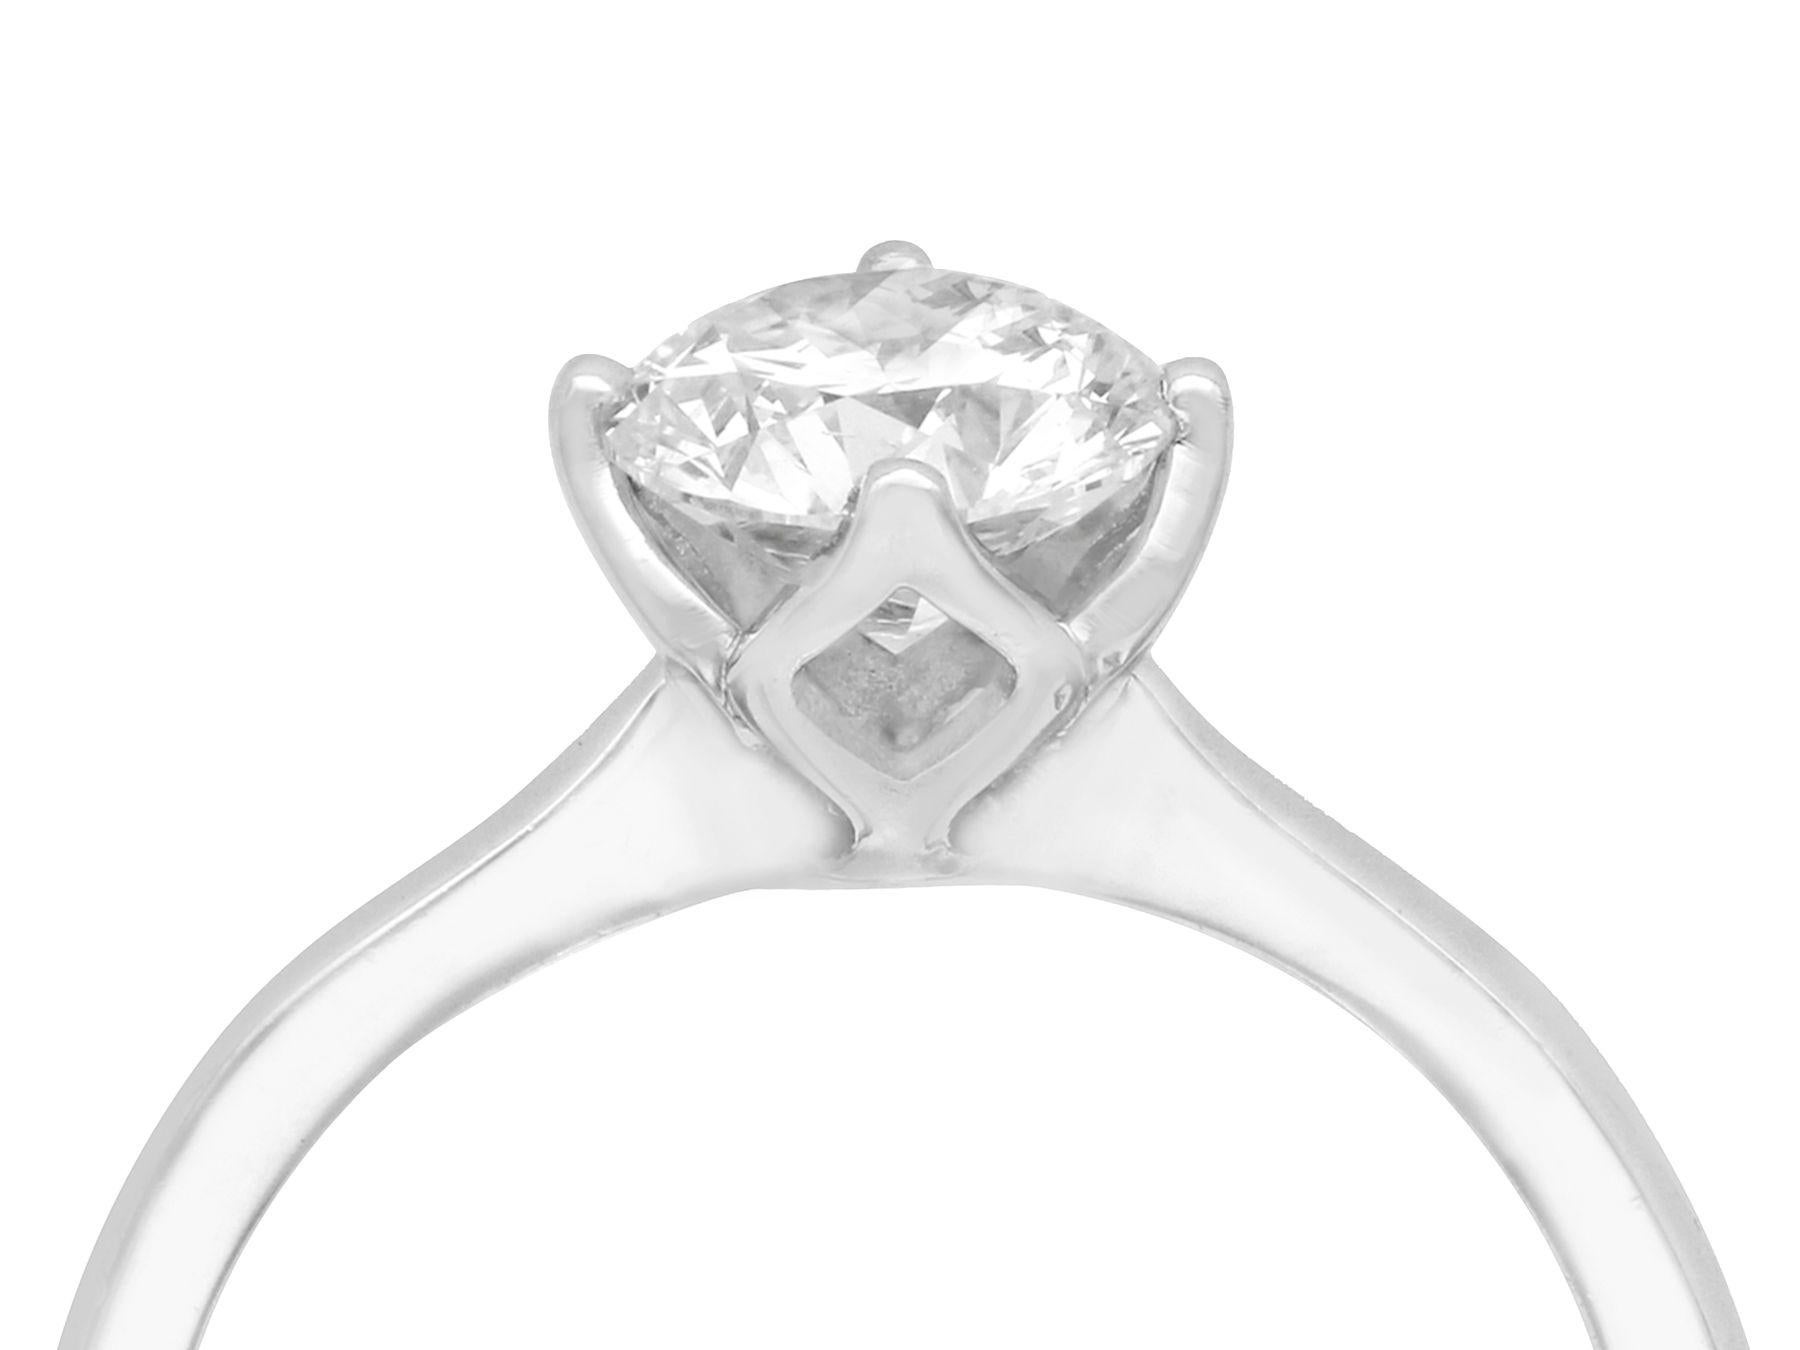 A fine 1.01 carat modern brilliant round cut contemporary diamond solitaire ring in platinum; part of our diverse diamond jewelry/jewelry collection.

This fine contemporary diamond ring has been crafted in platinum.

The 1.01cts modern brilliant